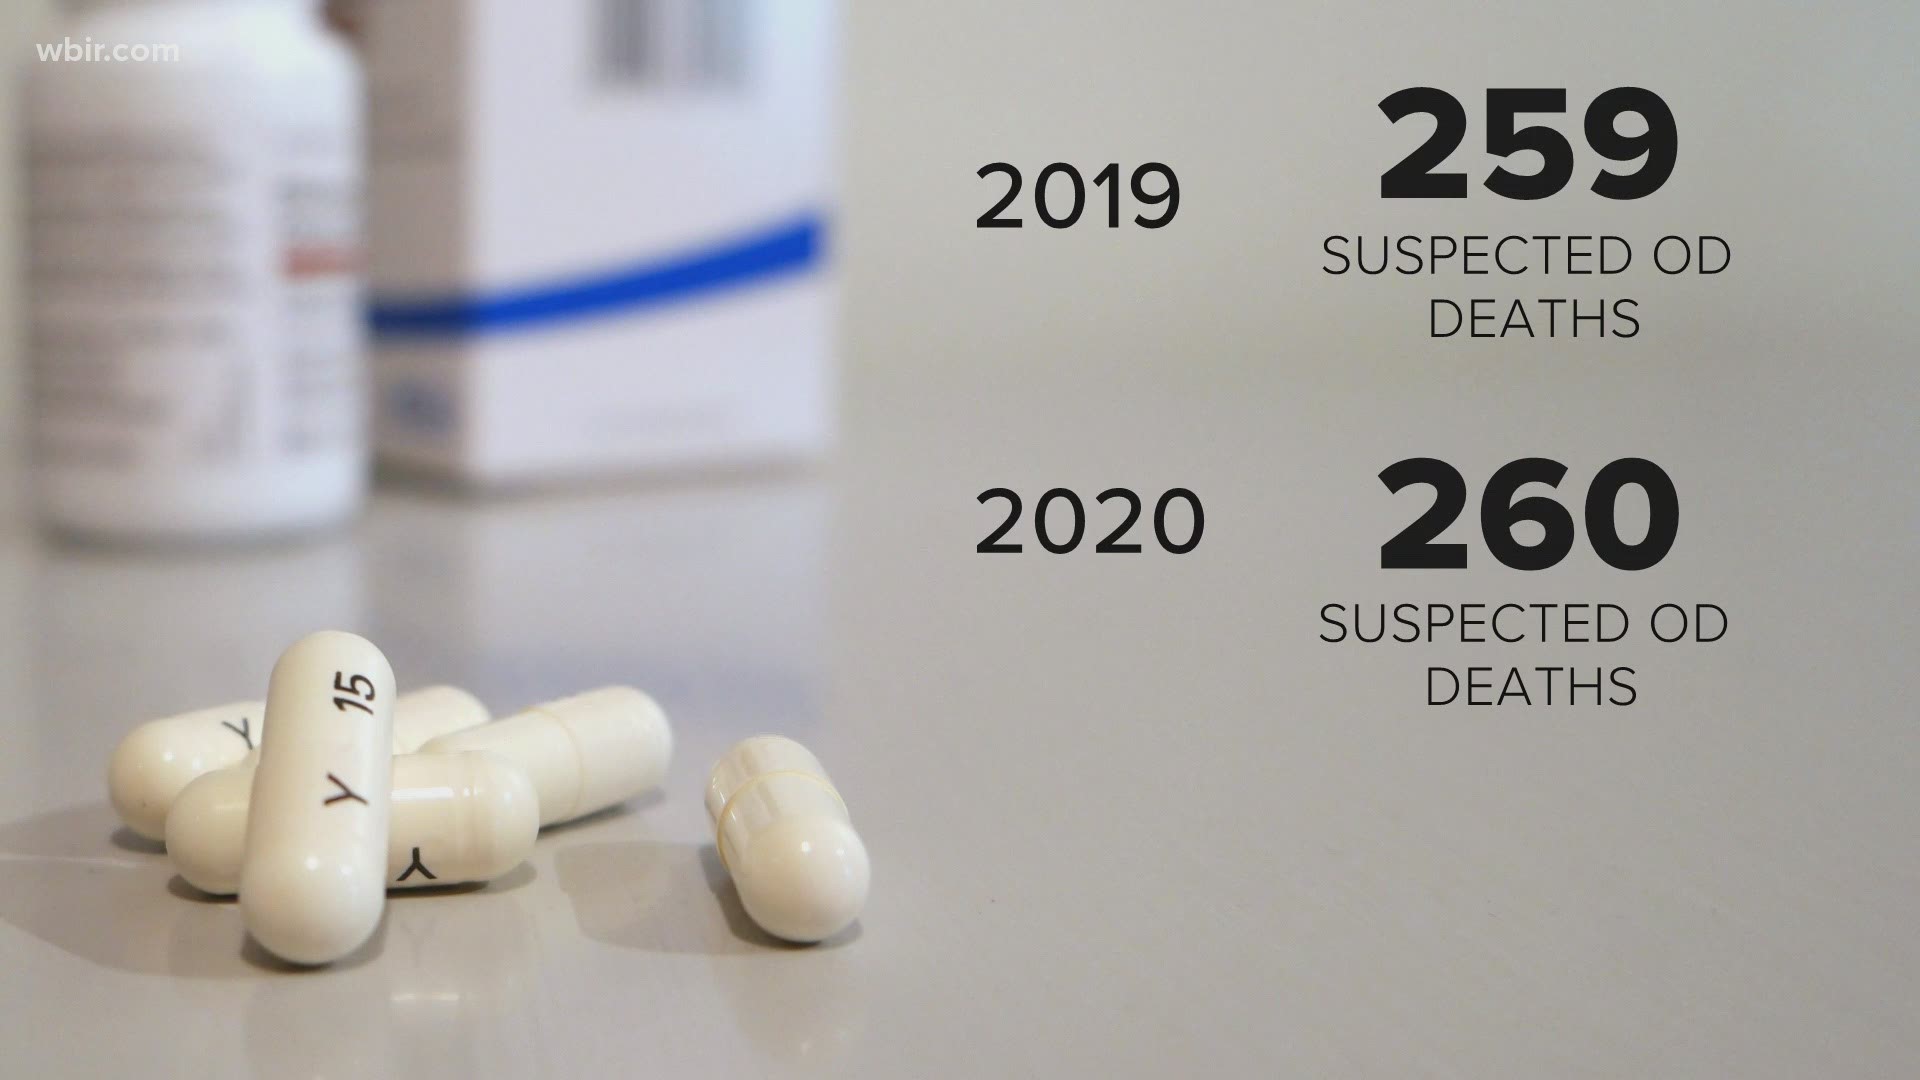 For people working to beat addiction in Knox County, 2020 and the COVID-19 pandemic has put up some large roadblocks.